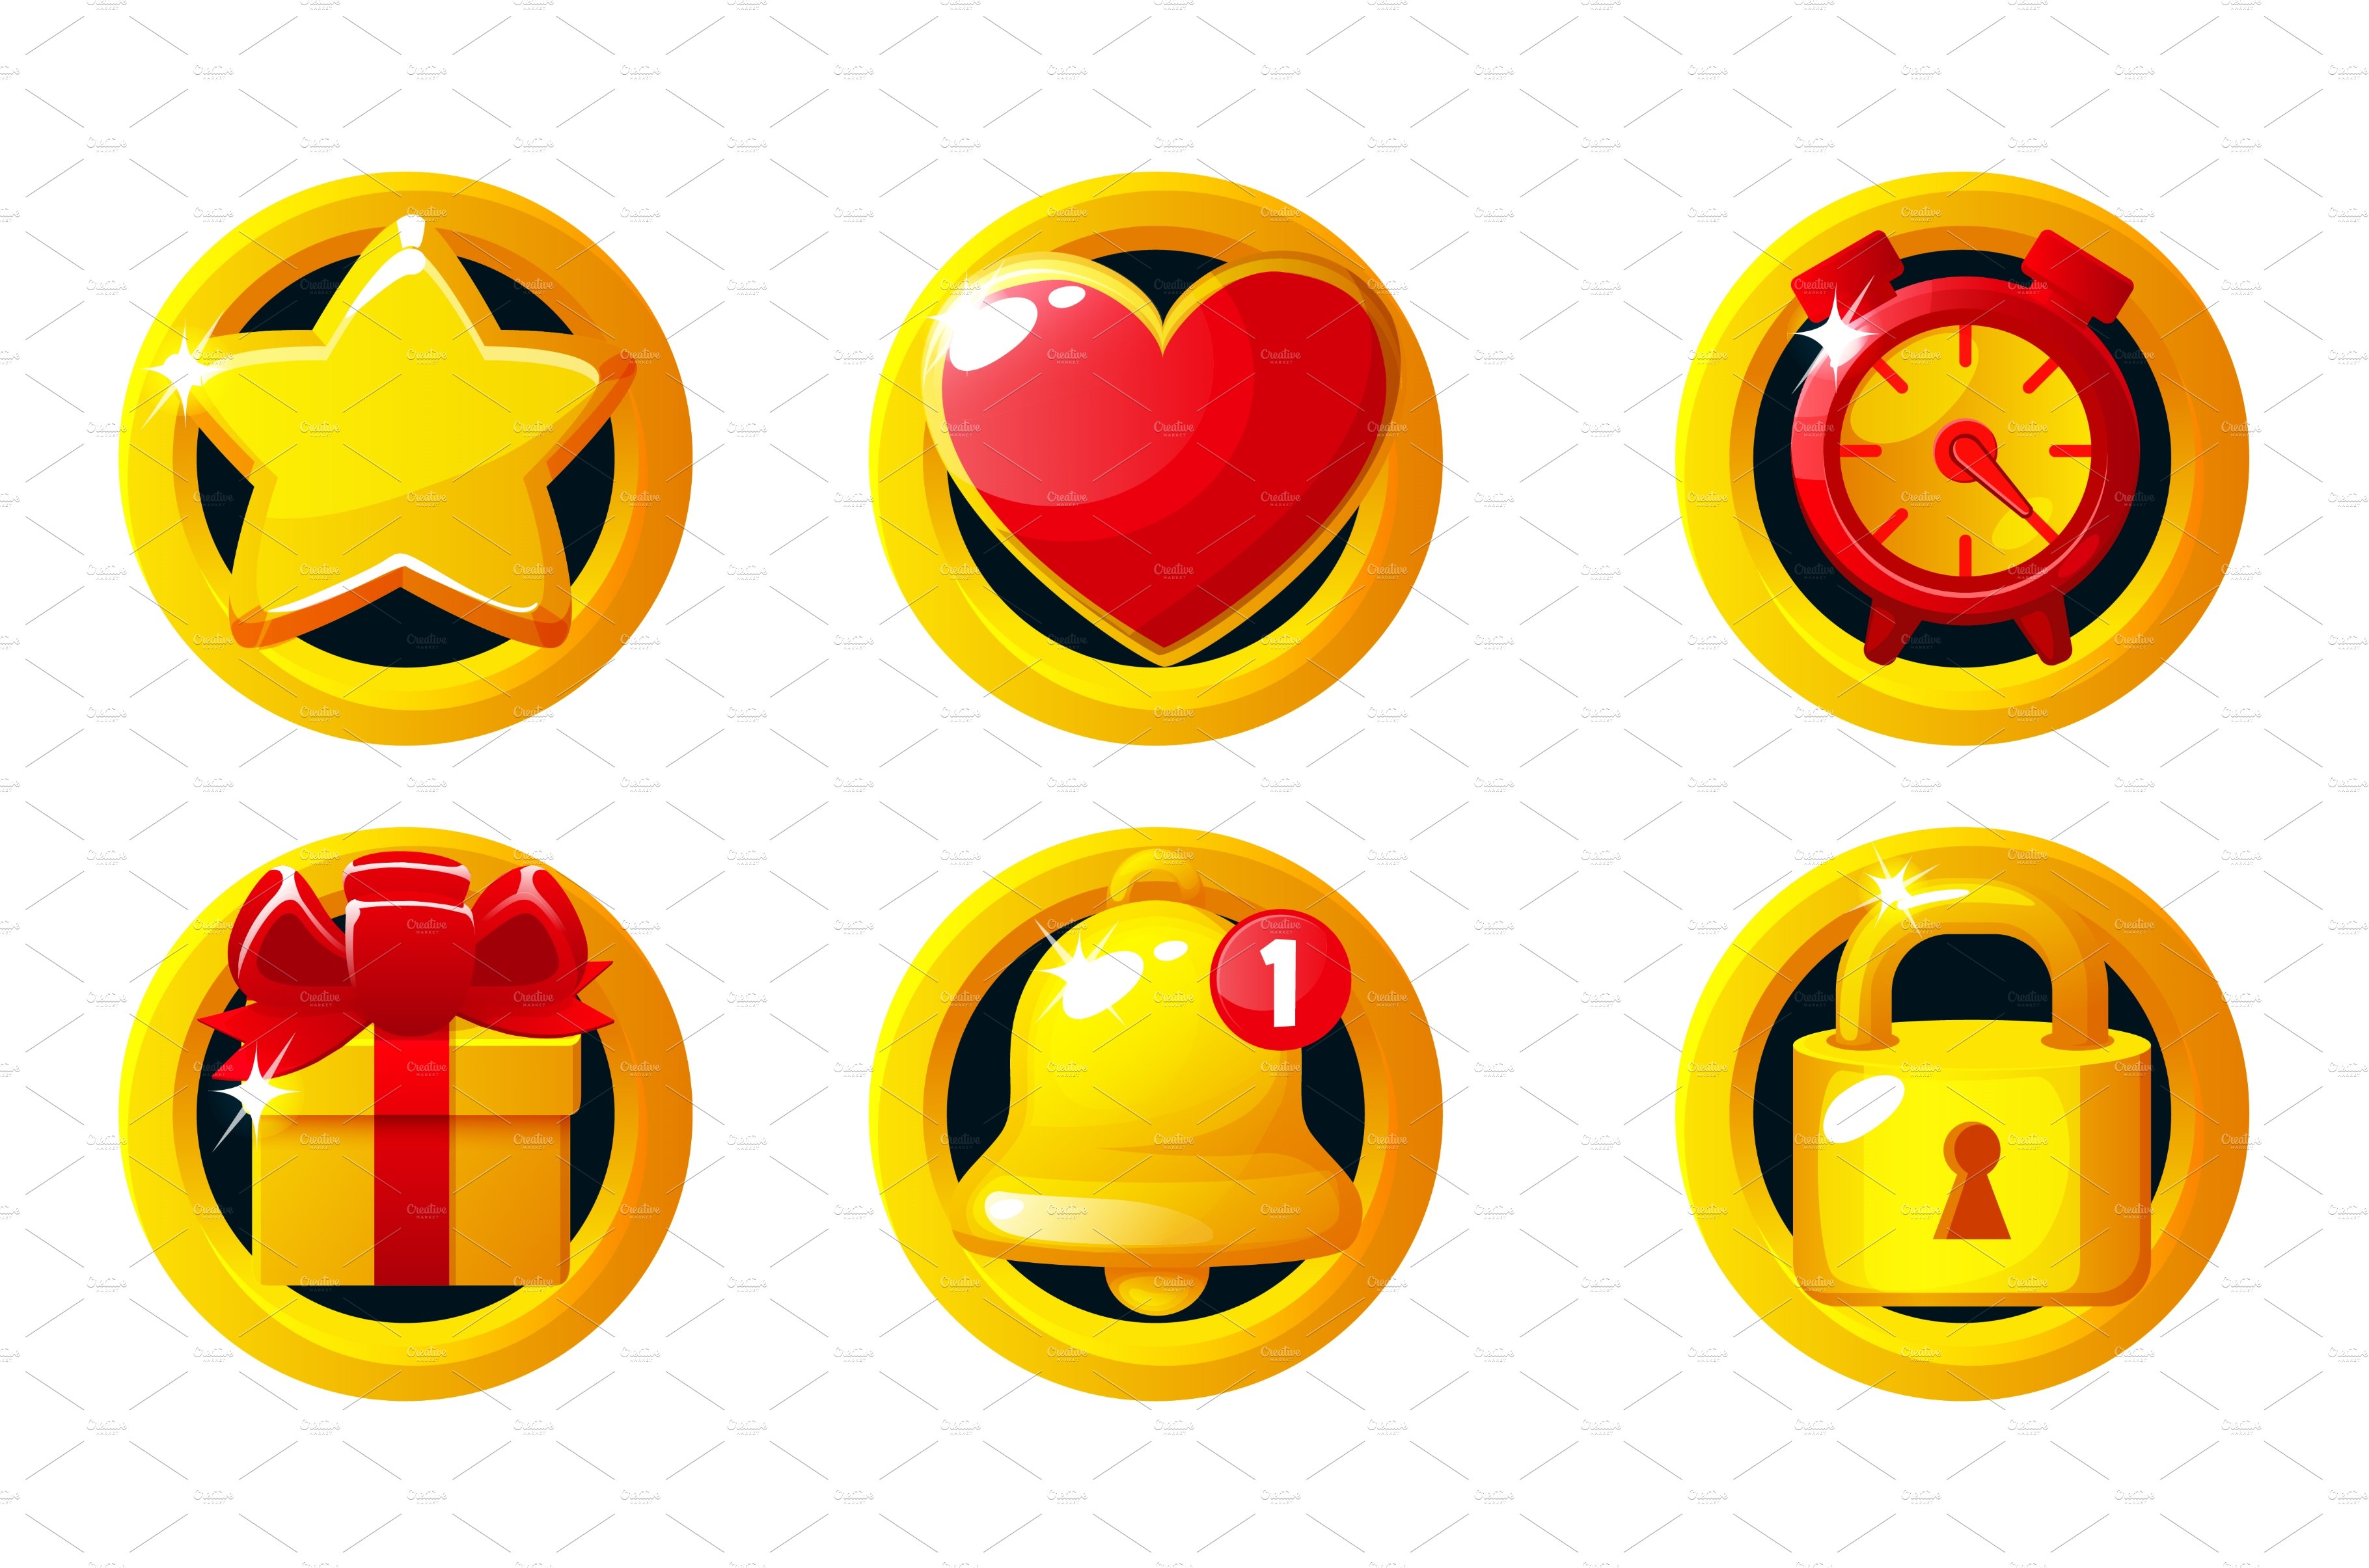 Set of golden game icons- star cover image.